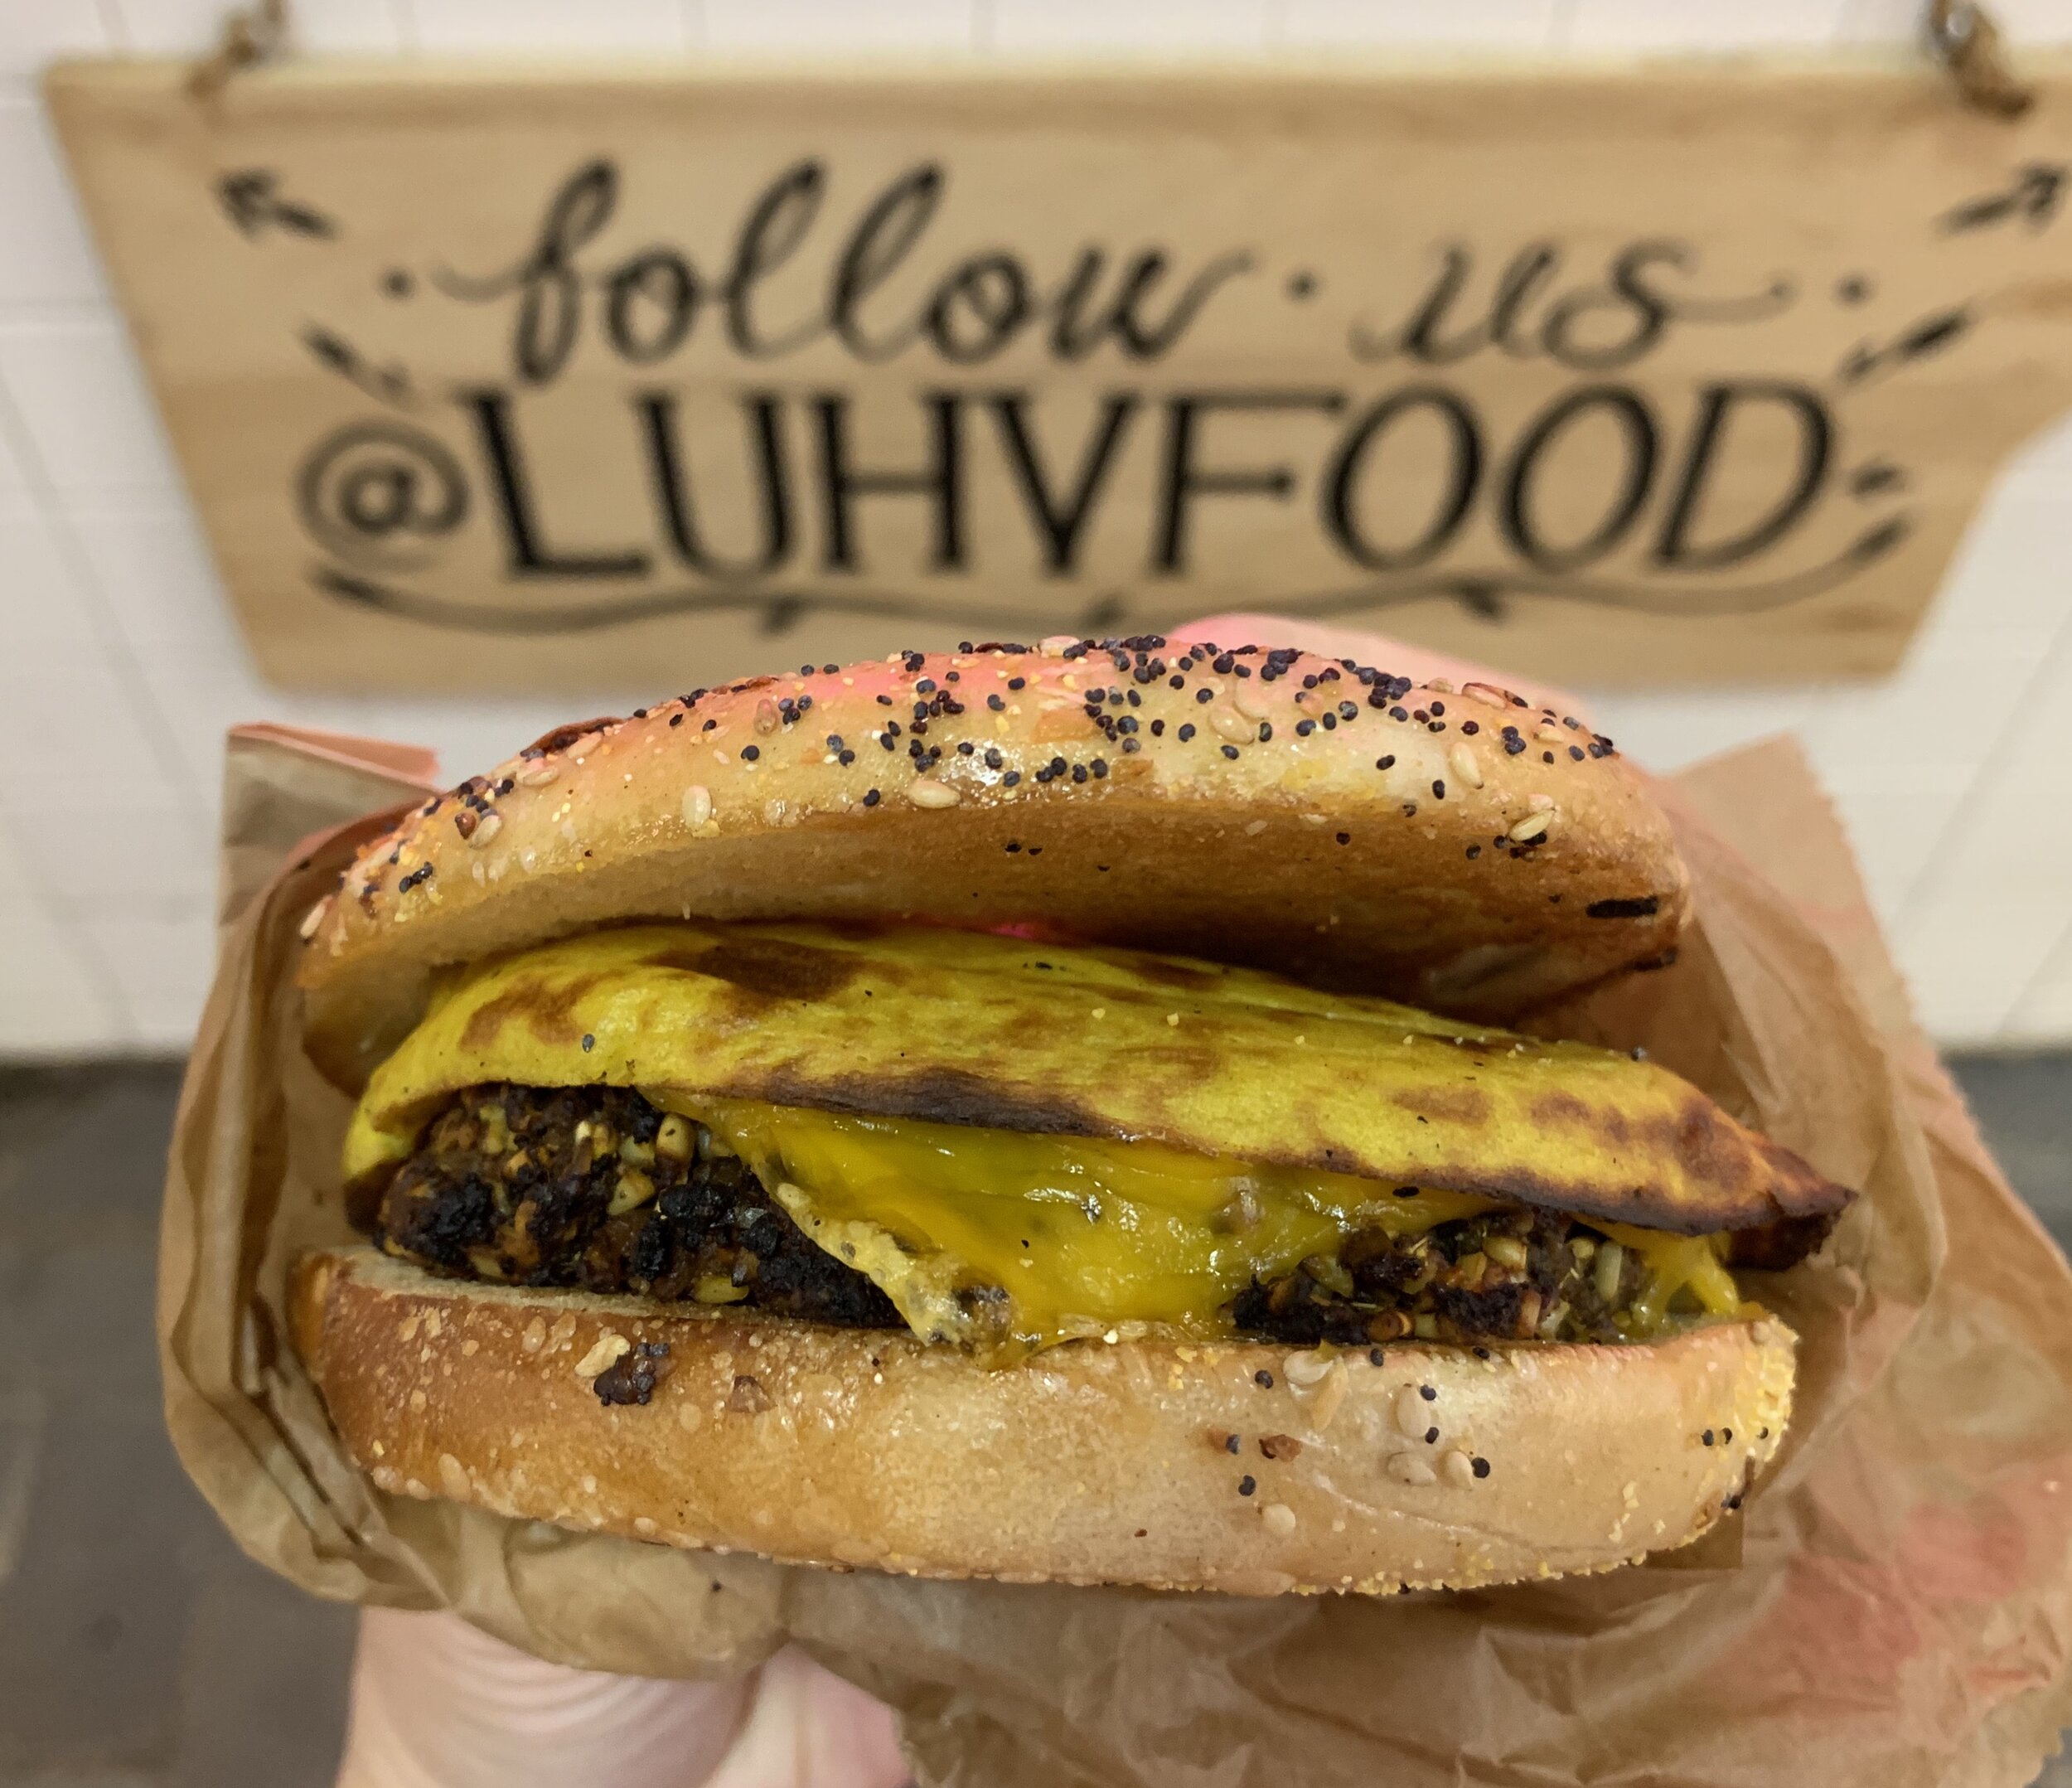 An everything bagel with vegan sausage and cheese, plus tofu with a sign in the background that reads "follow us @luhvfood"